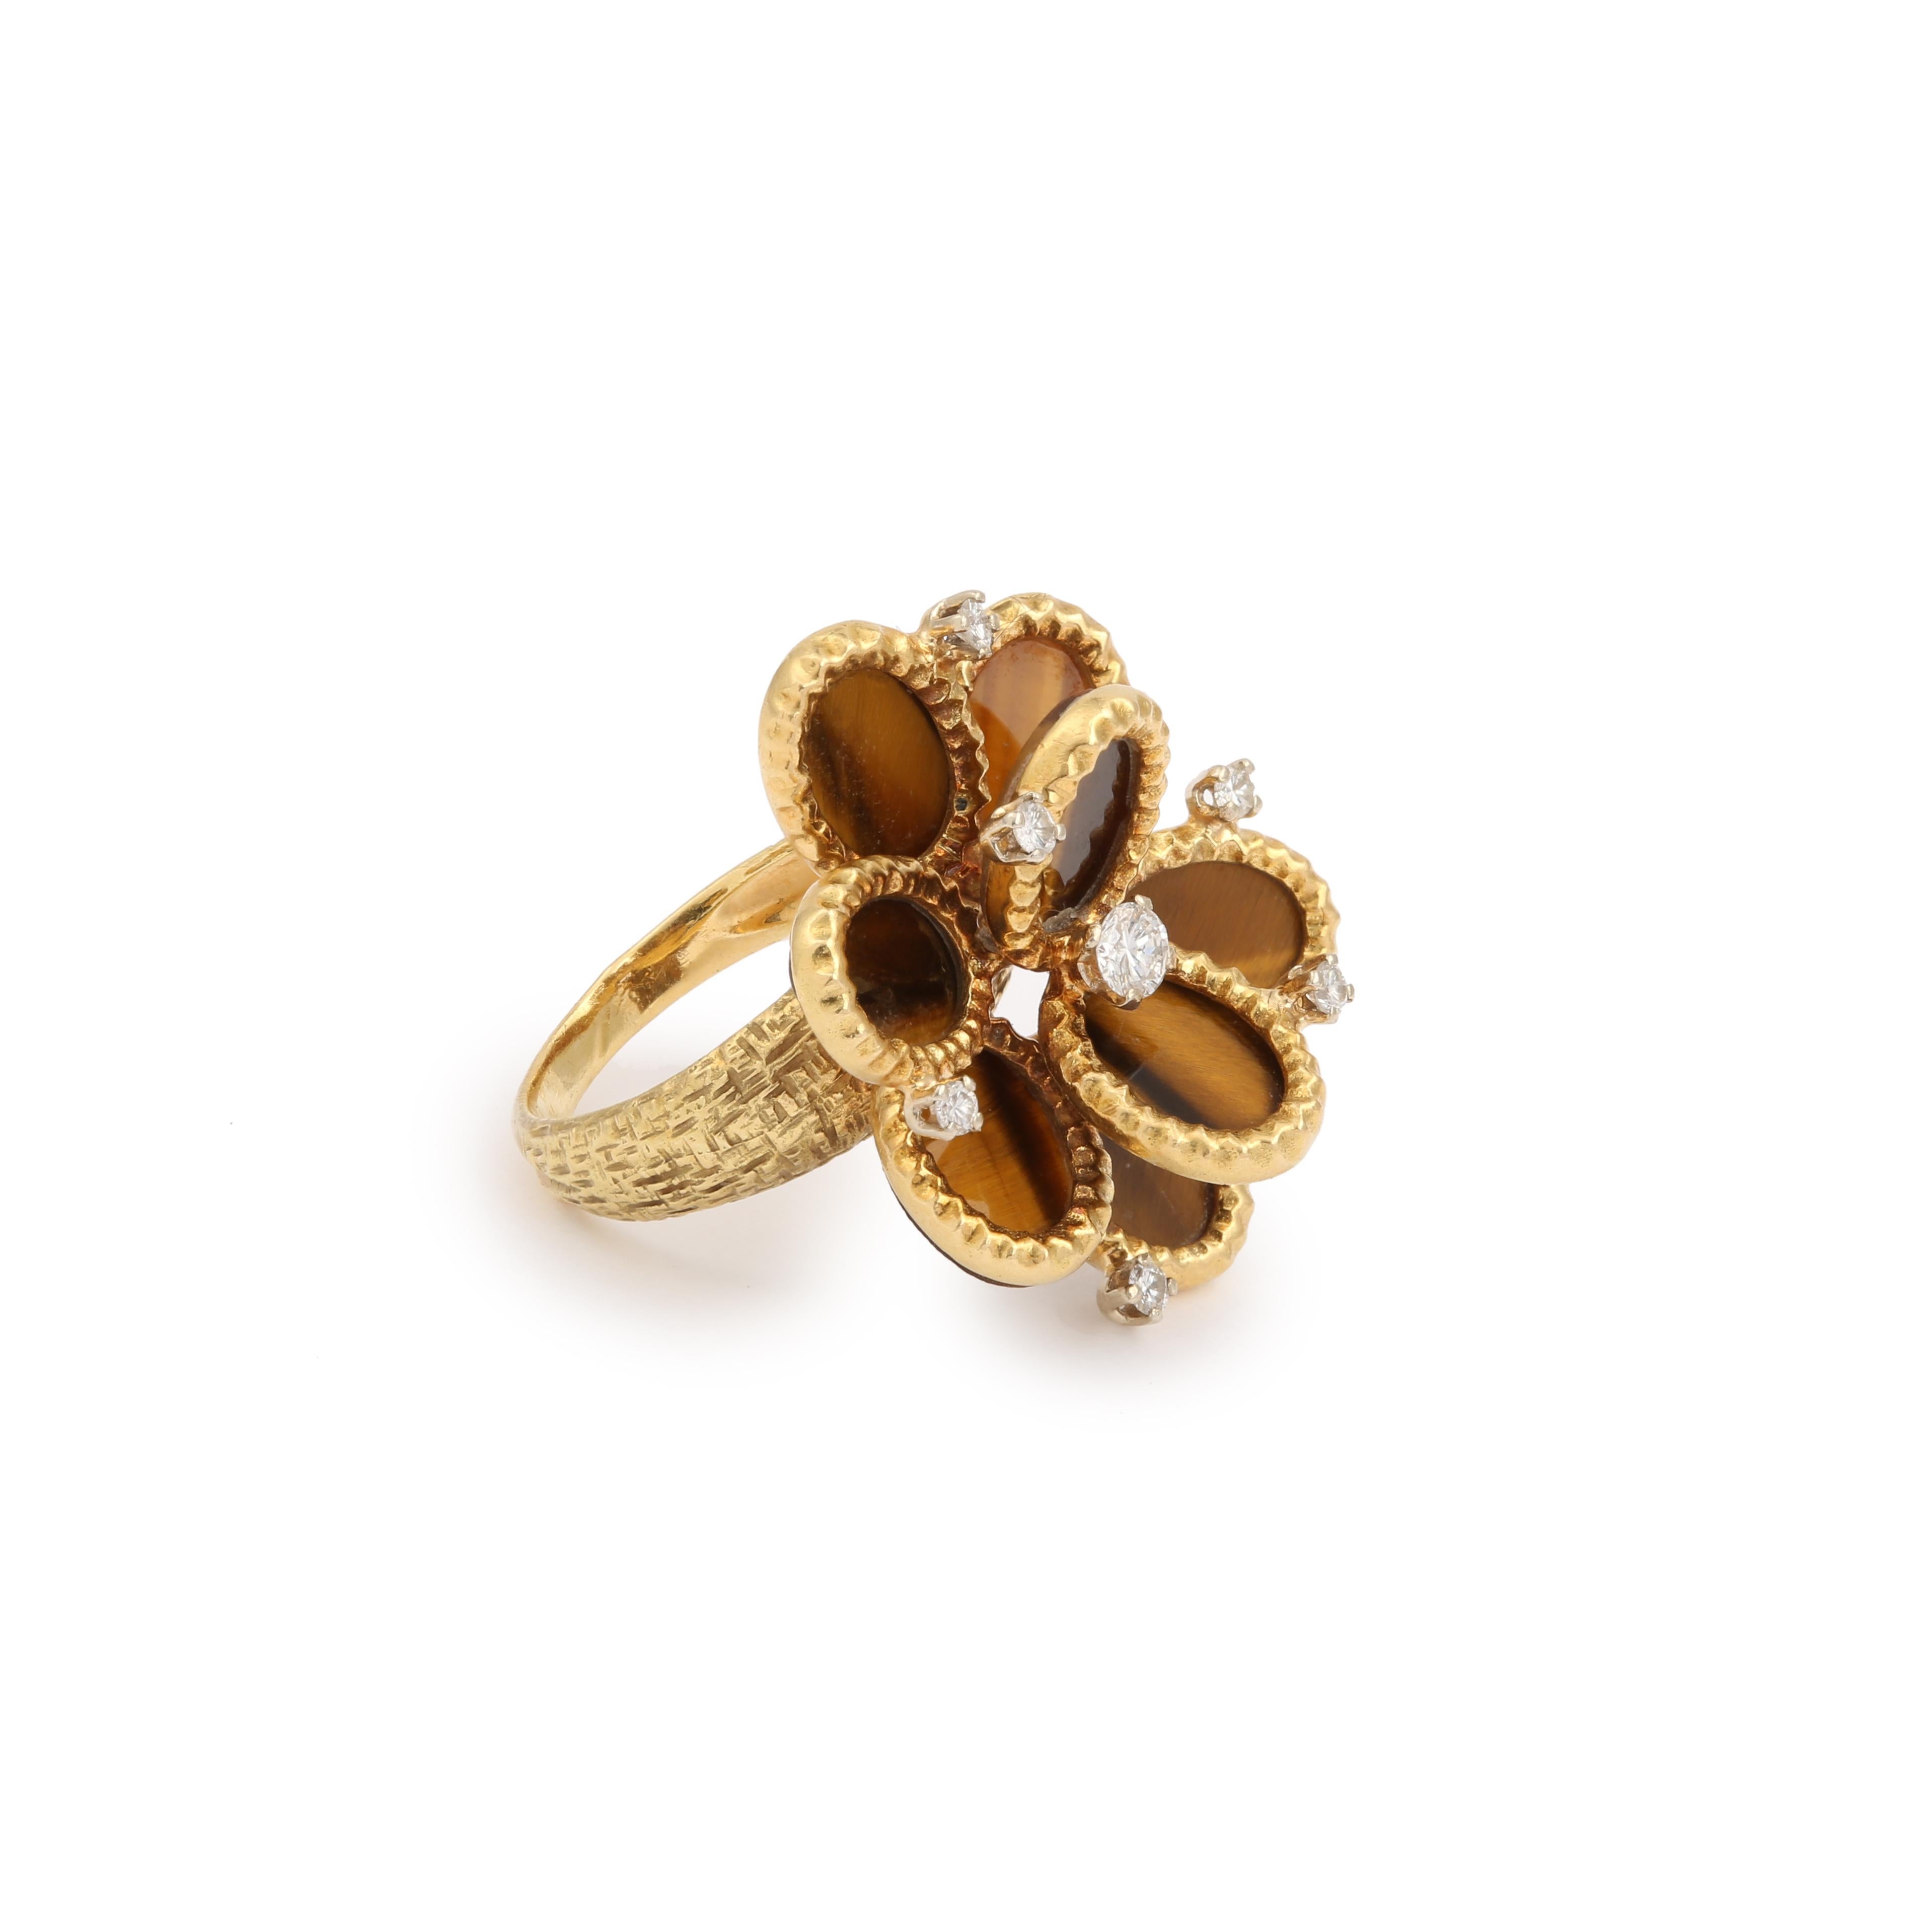 Surprising vintage ring featuring a yellow gold flower set with tiger eye cabochons for the petals and small round diamonds.

This model of ring was probably created by the company Edouard Richards (52 rue Lafayette), which essentially worked for